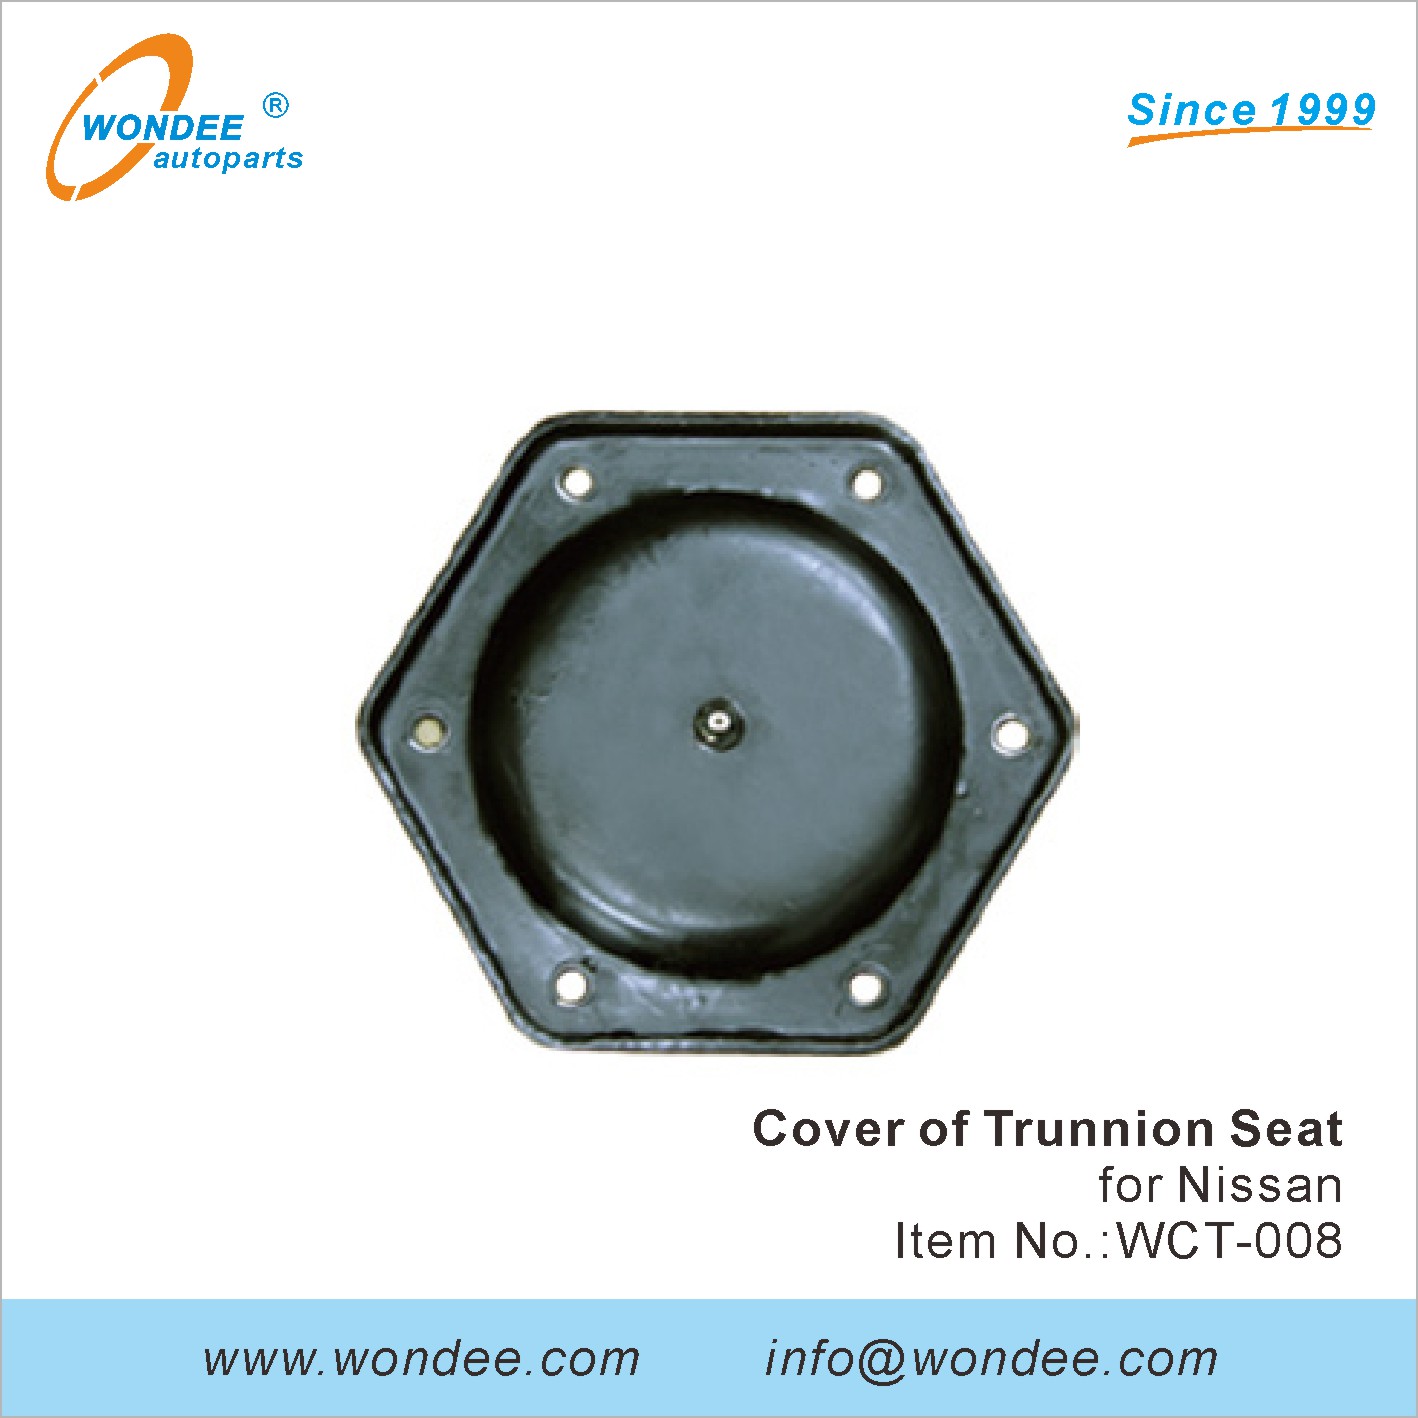 WONDEE cover of trunnion seat (8)